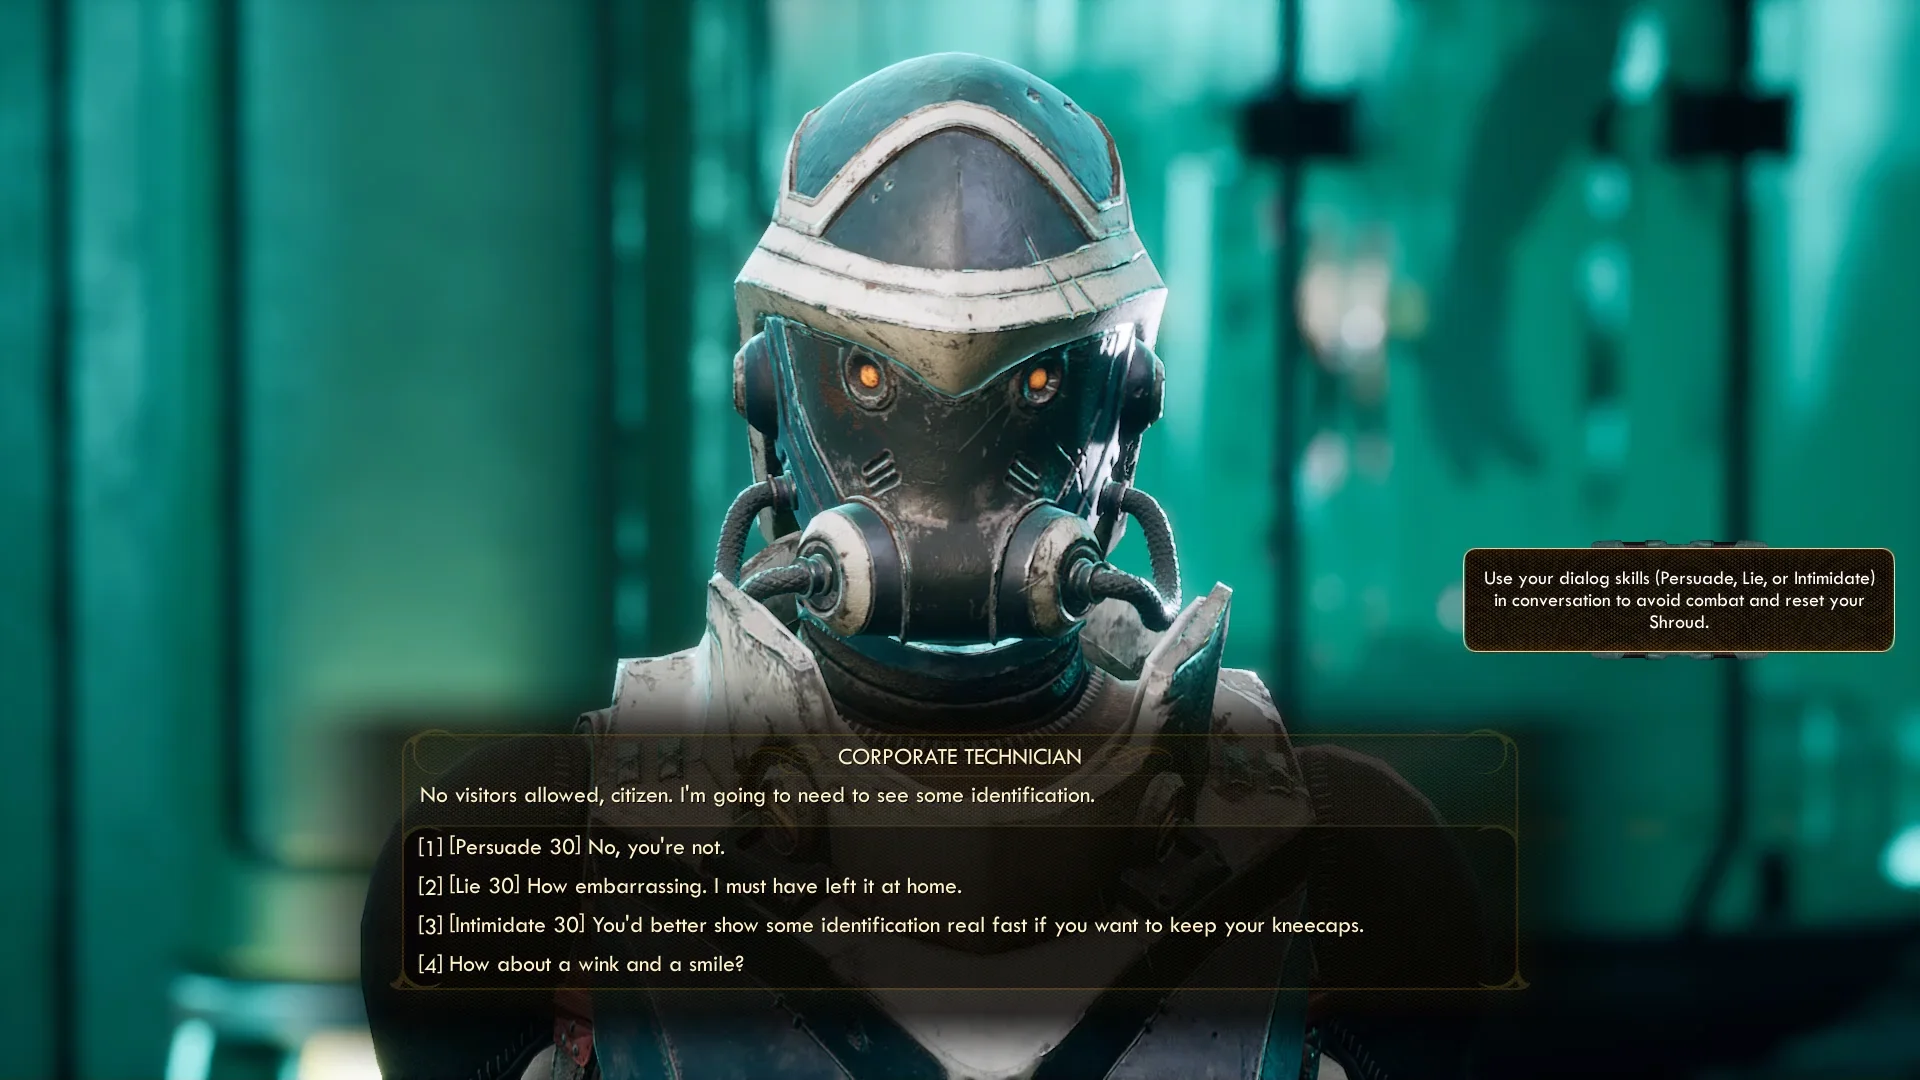 The Outer Worlds Gameplay Shows Off Dialogue Choices and Combat